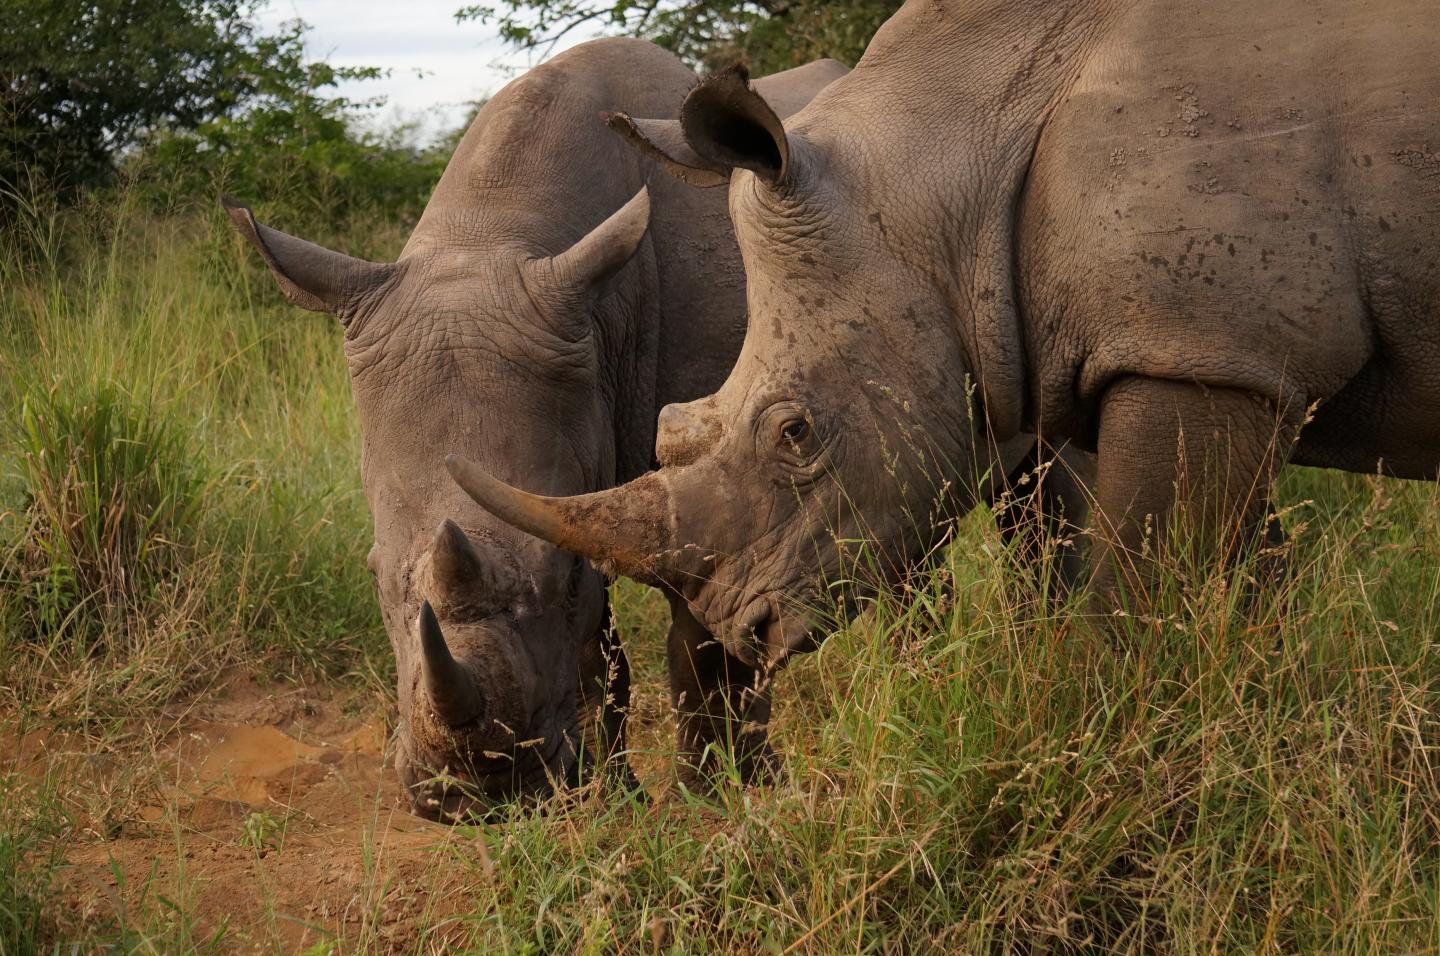 Rhinoceros are threatened so severely by an illegal trade in their horns that tourists are advised not share the locations they spotted the animals in, so poachers cannot easily locate them. Source: Christoph Fink